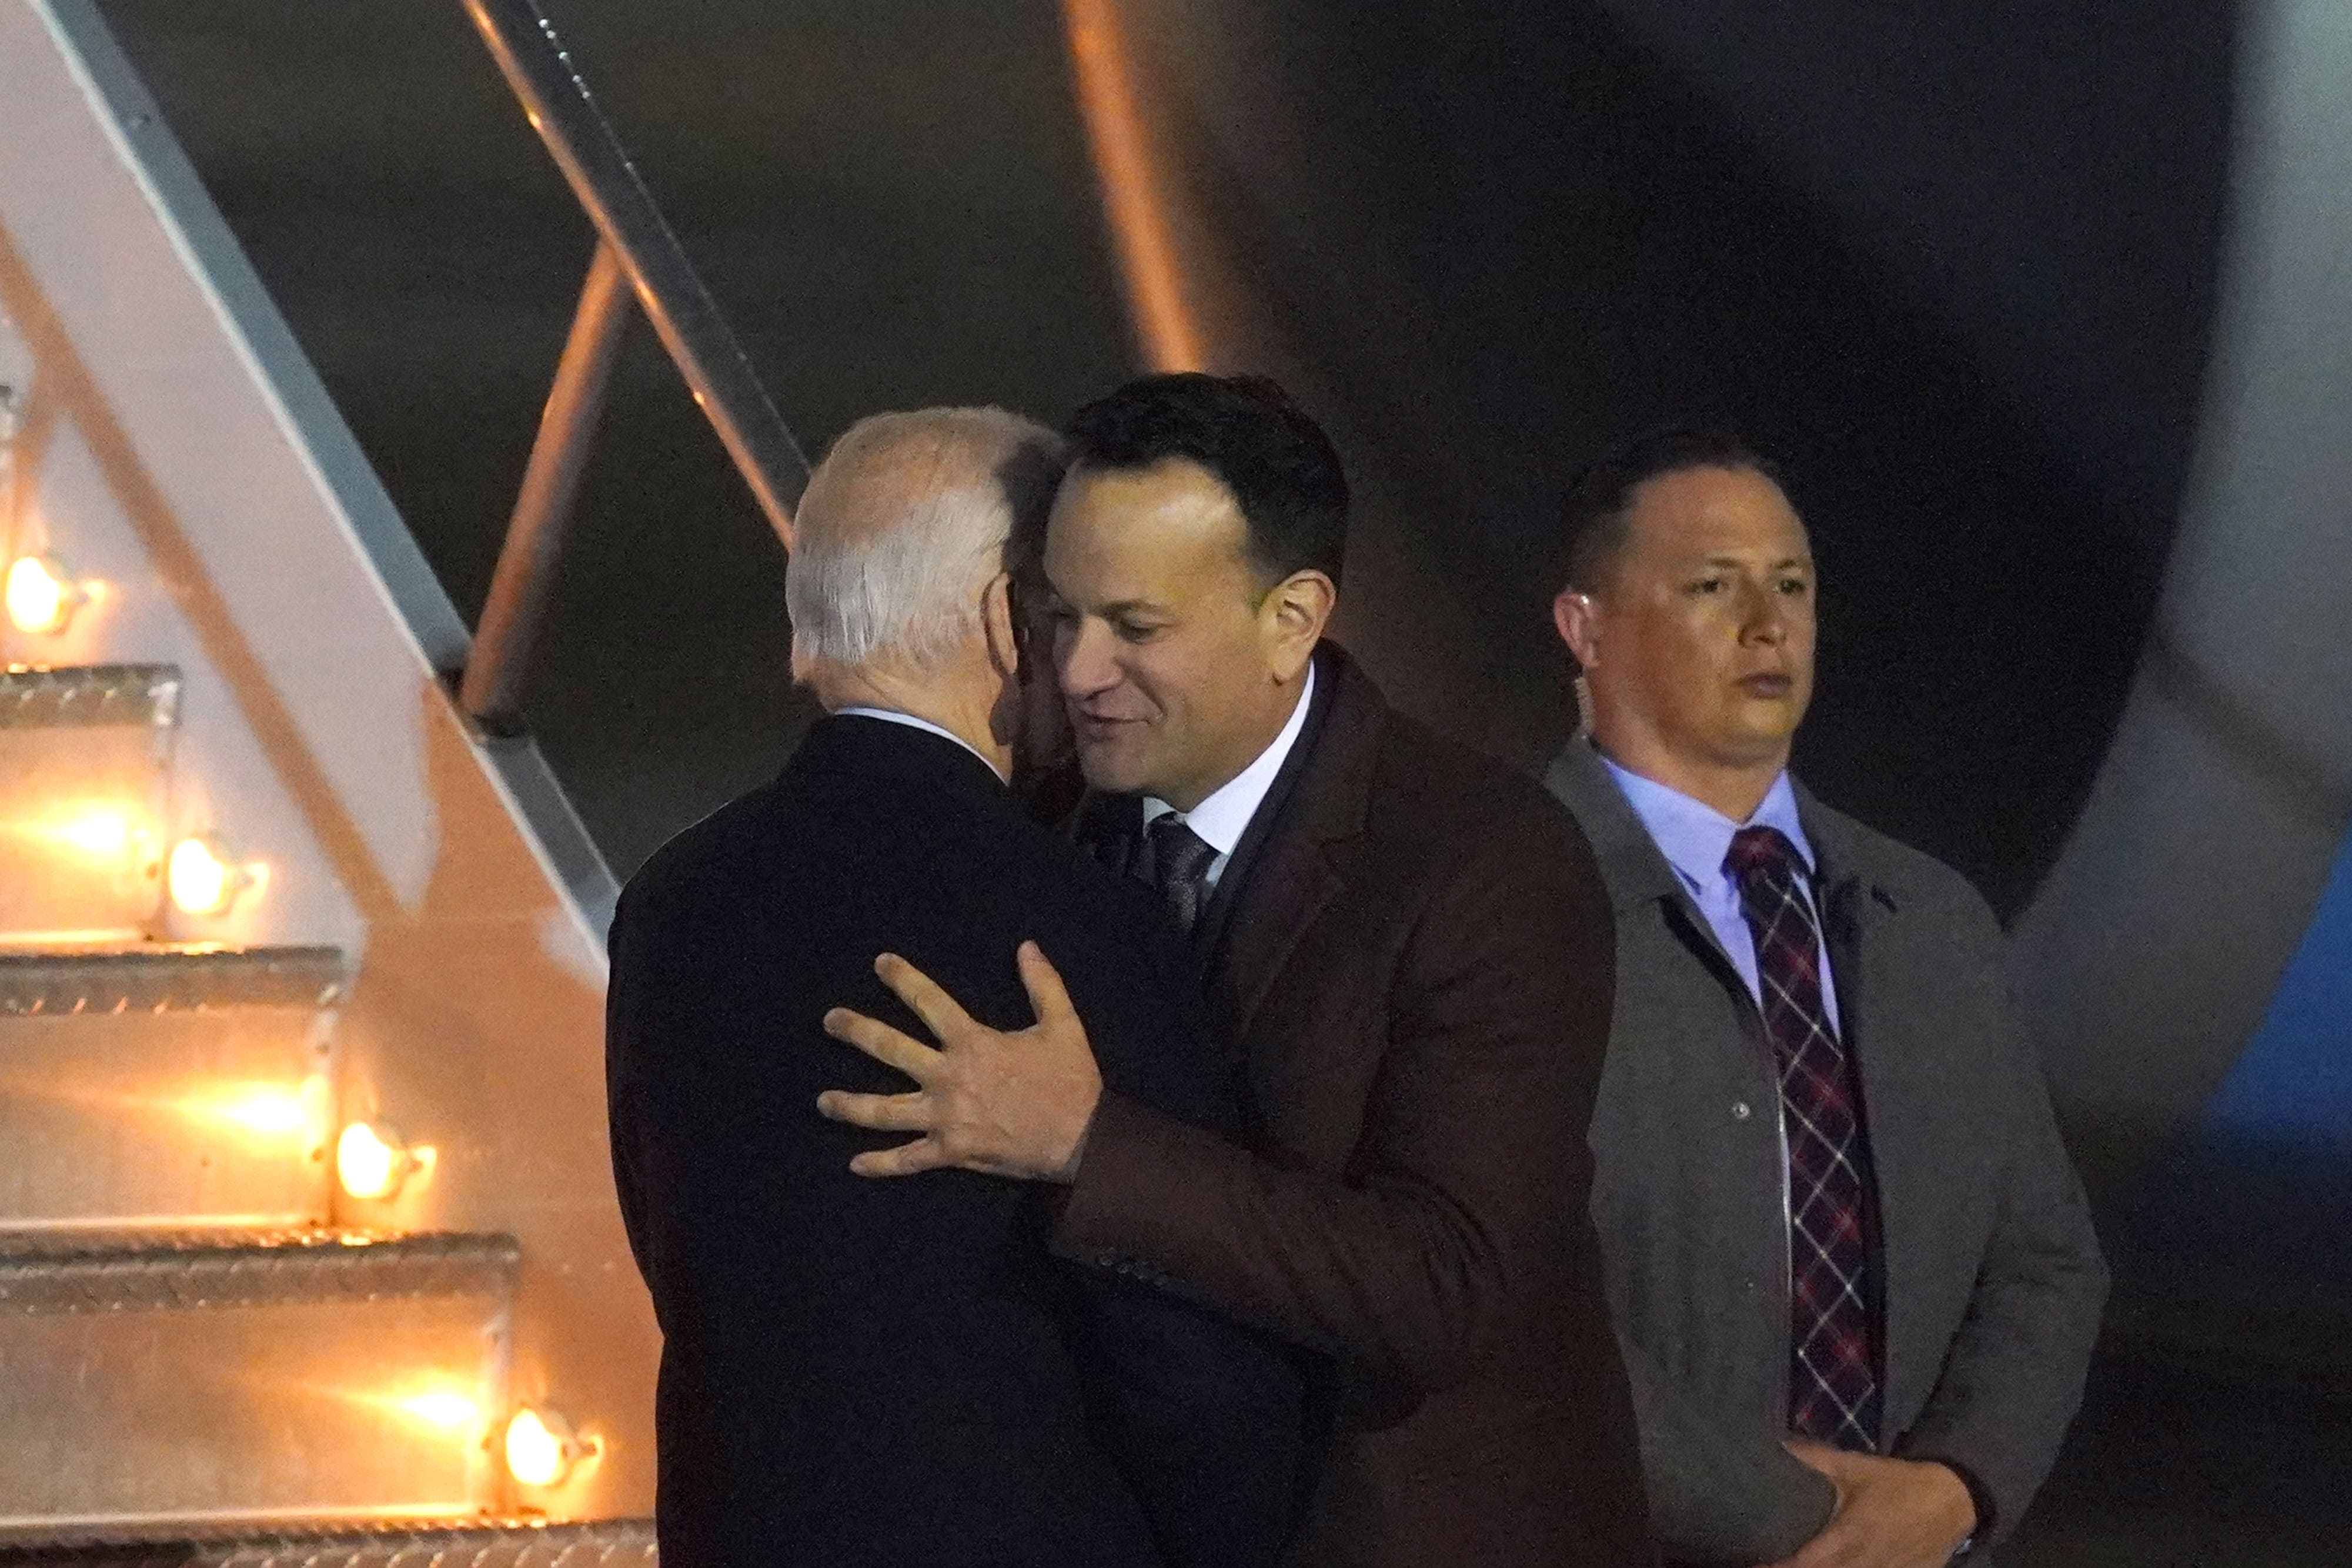 US President Joe Biden (left) hugs Taoiseach Leo Varadkar as he boards a plane to leave Ireland West Airport Knock, in County Mayo, on the last day of his visit to the island of Ireland. Picture date: Friday April 14, 2023.